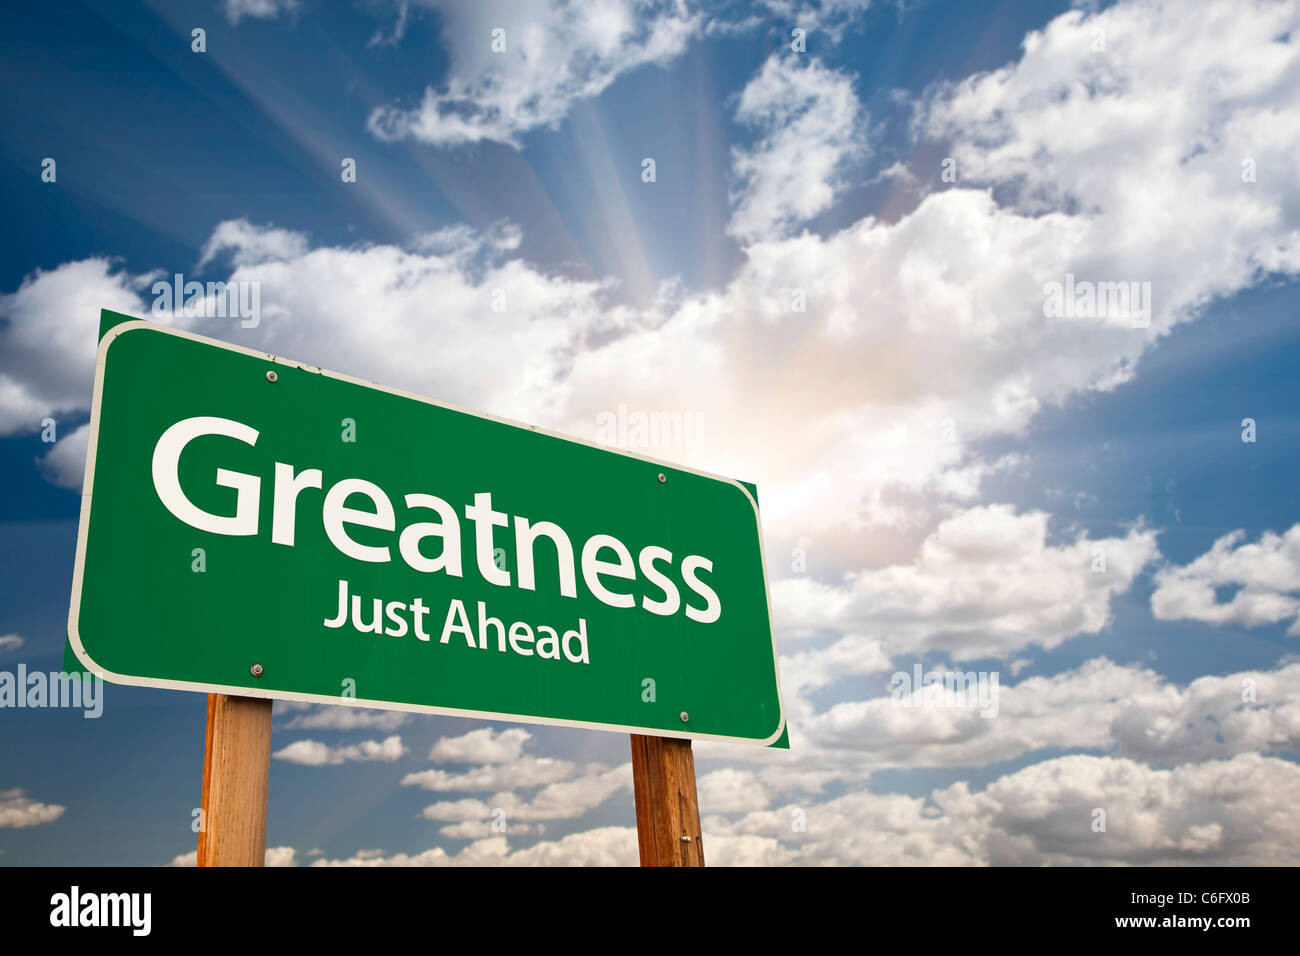 Greatness, Just Ahead Green Road Sign Over Dramatic Sky, Clouds and Sunburst. Stock Photo